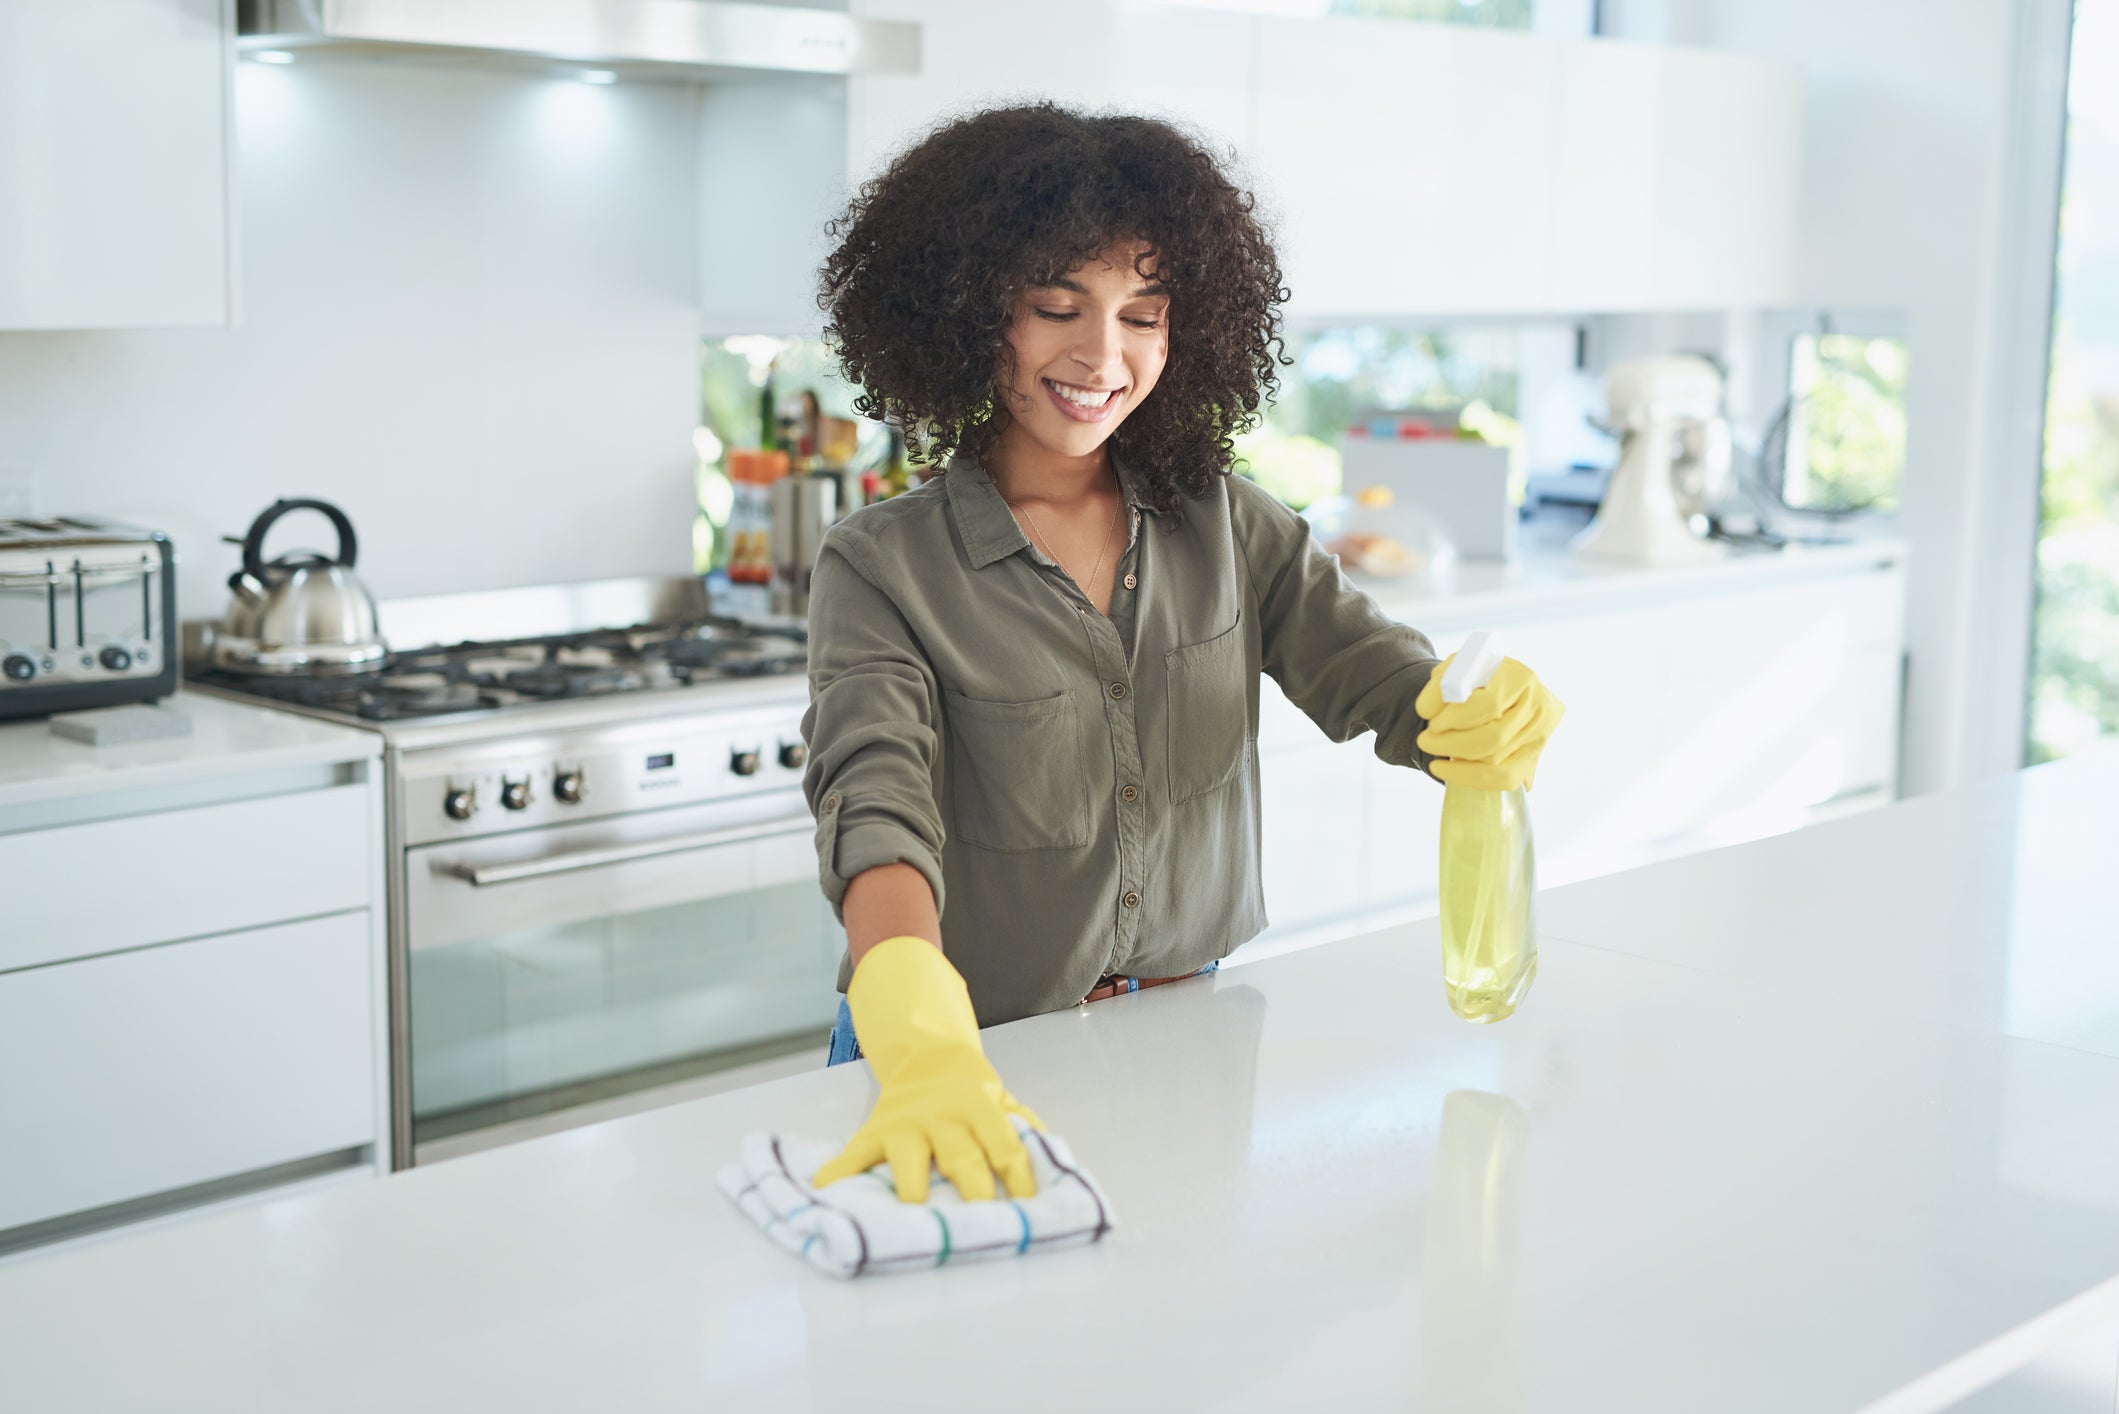 How To Spring Clean Your Life for Better Health and More Happiness